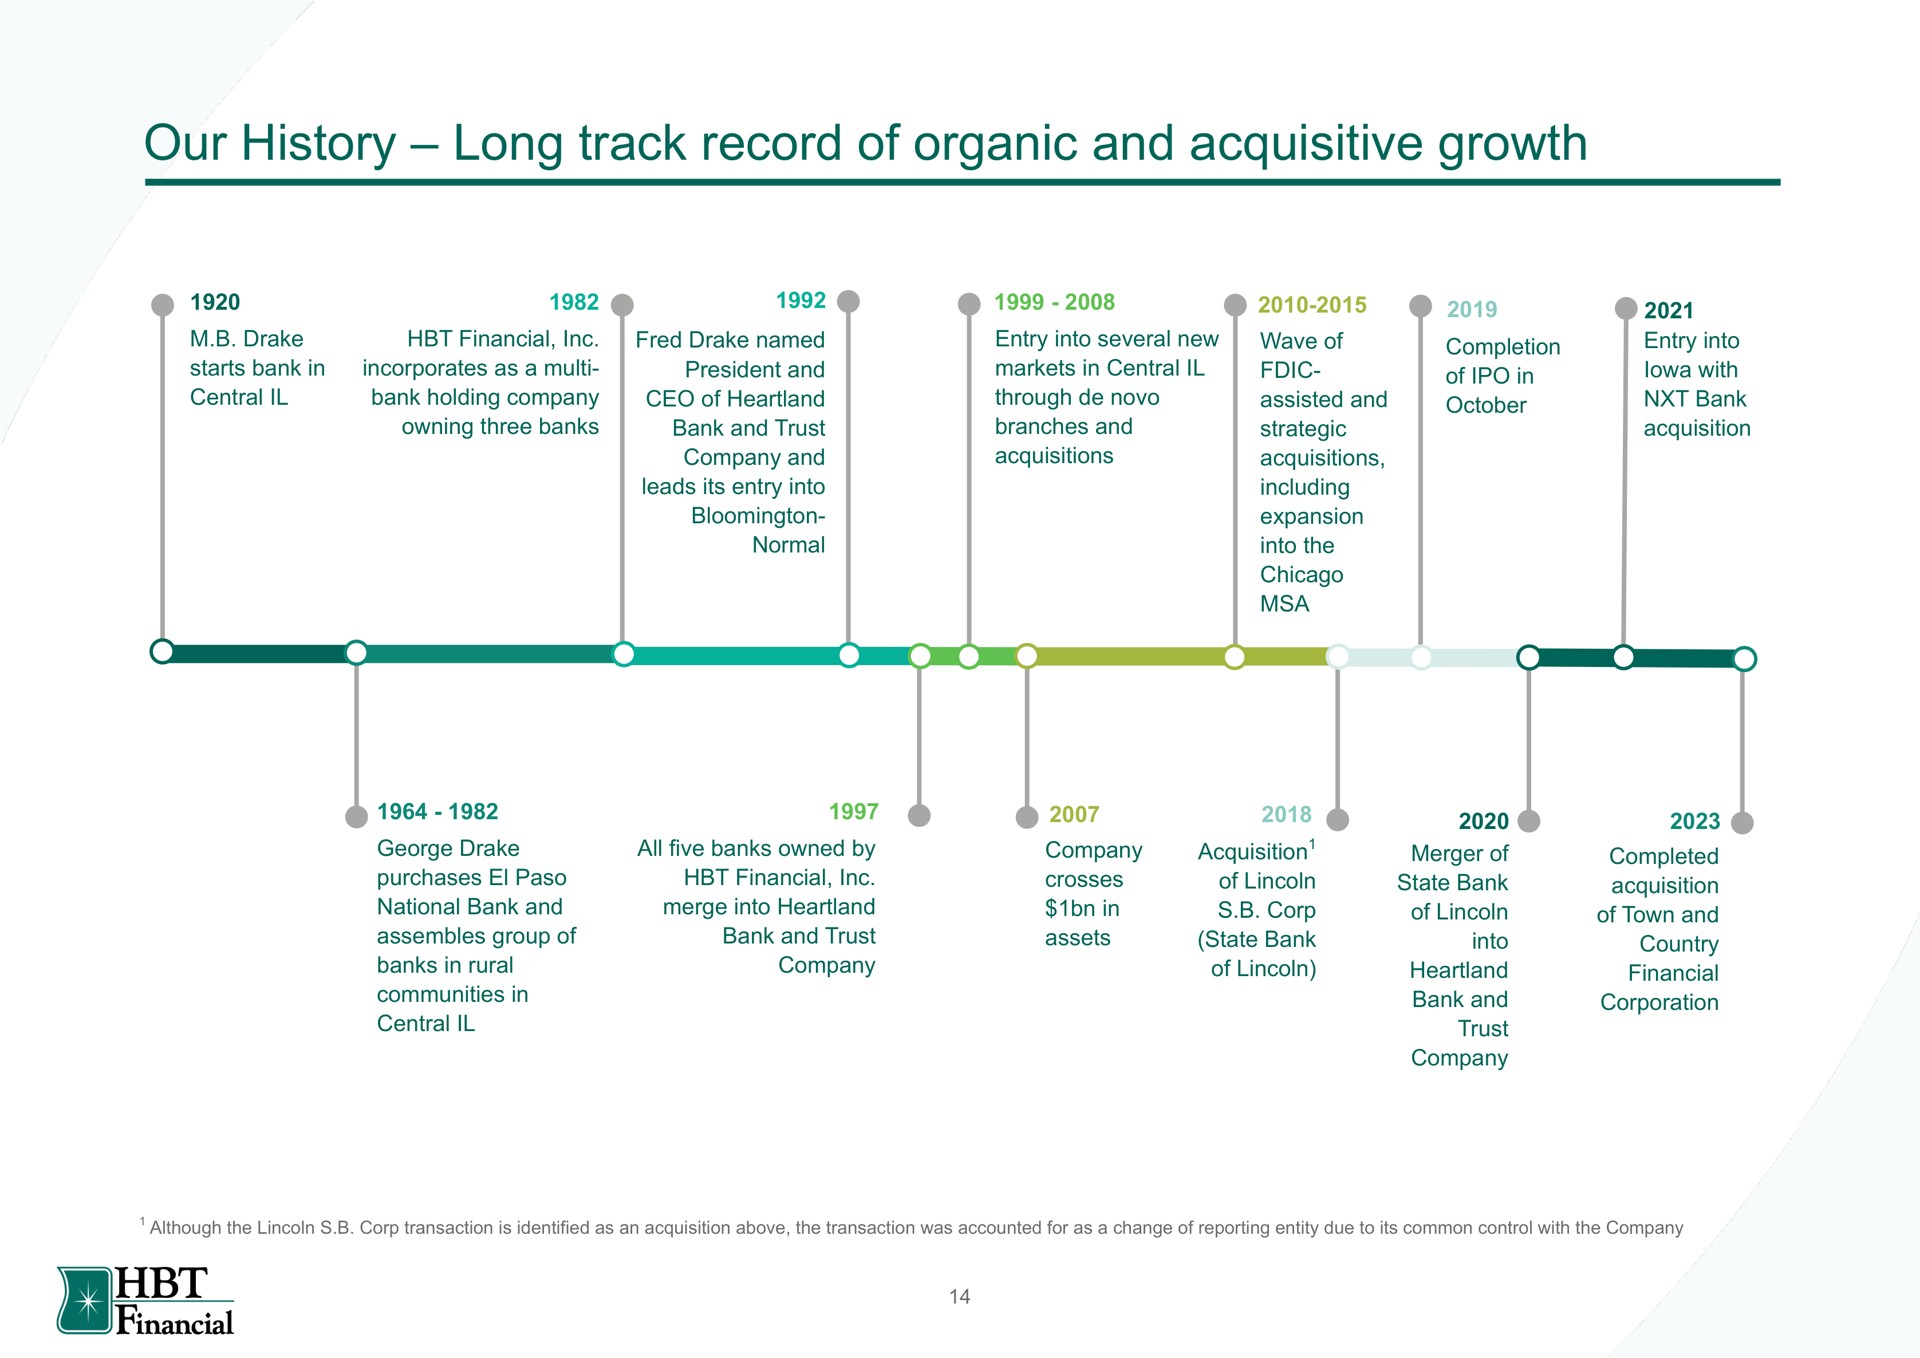 our history long track record of organic and acquisitive growth | HBT Financial